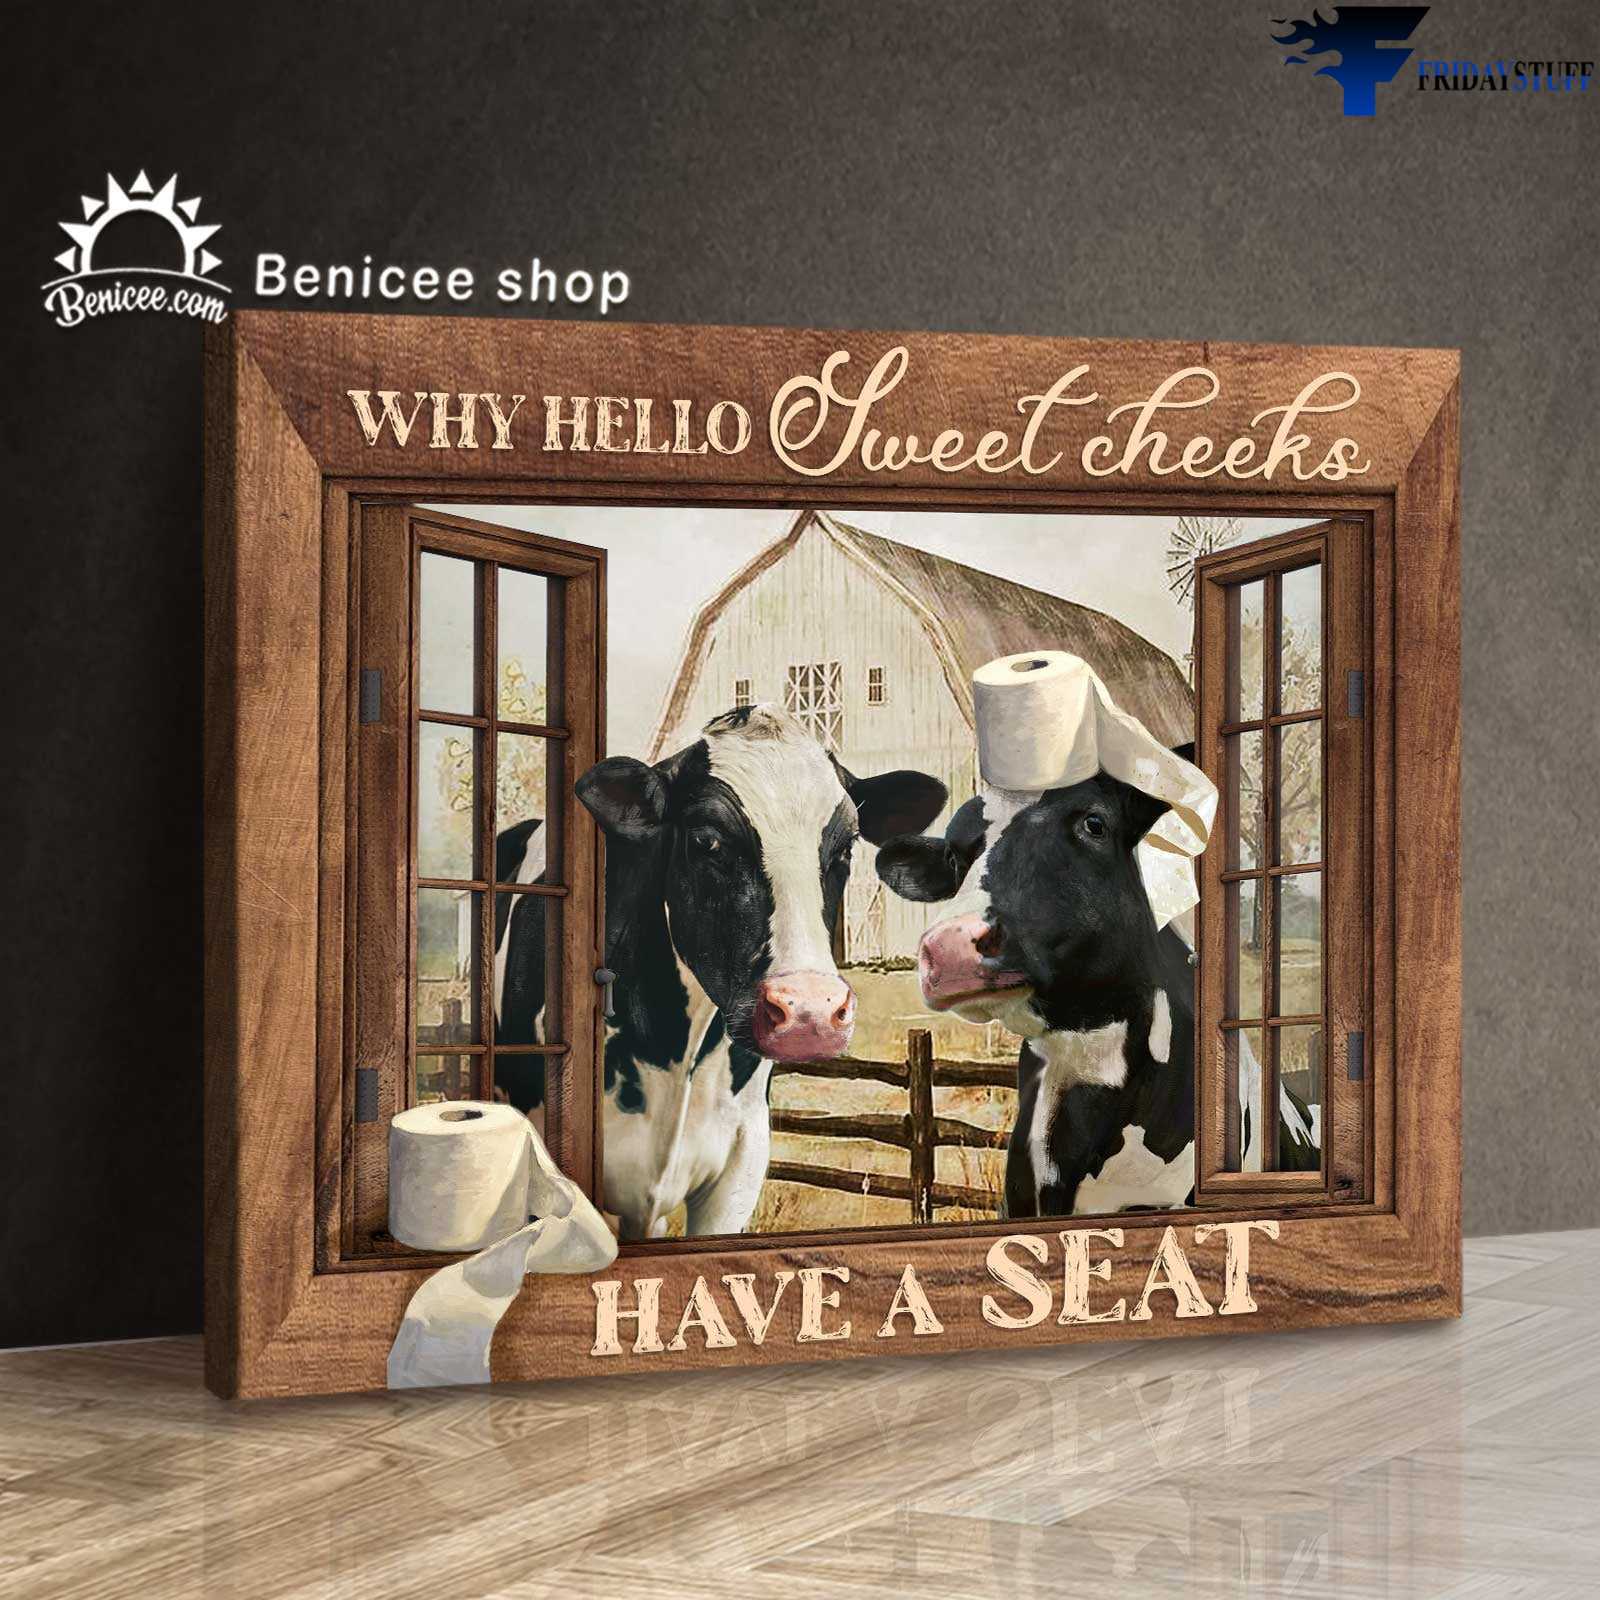 Dairy Cow, Farmer Poster, Toilet Paper Roll - Why Hello Sweet Cheeks, Have A Seat